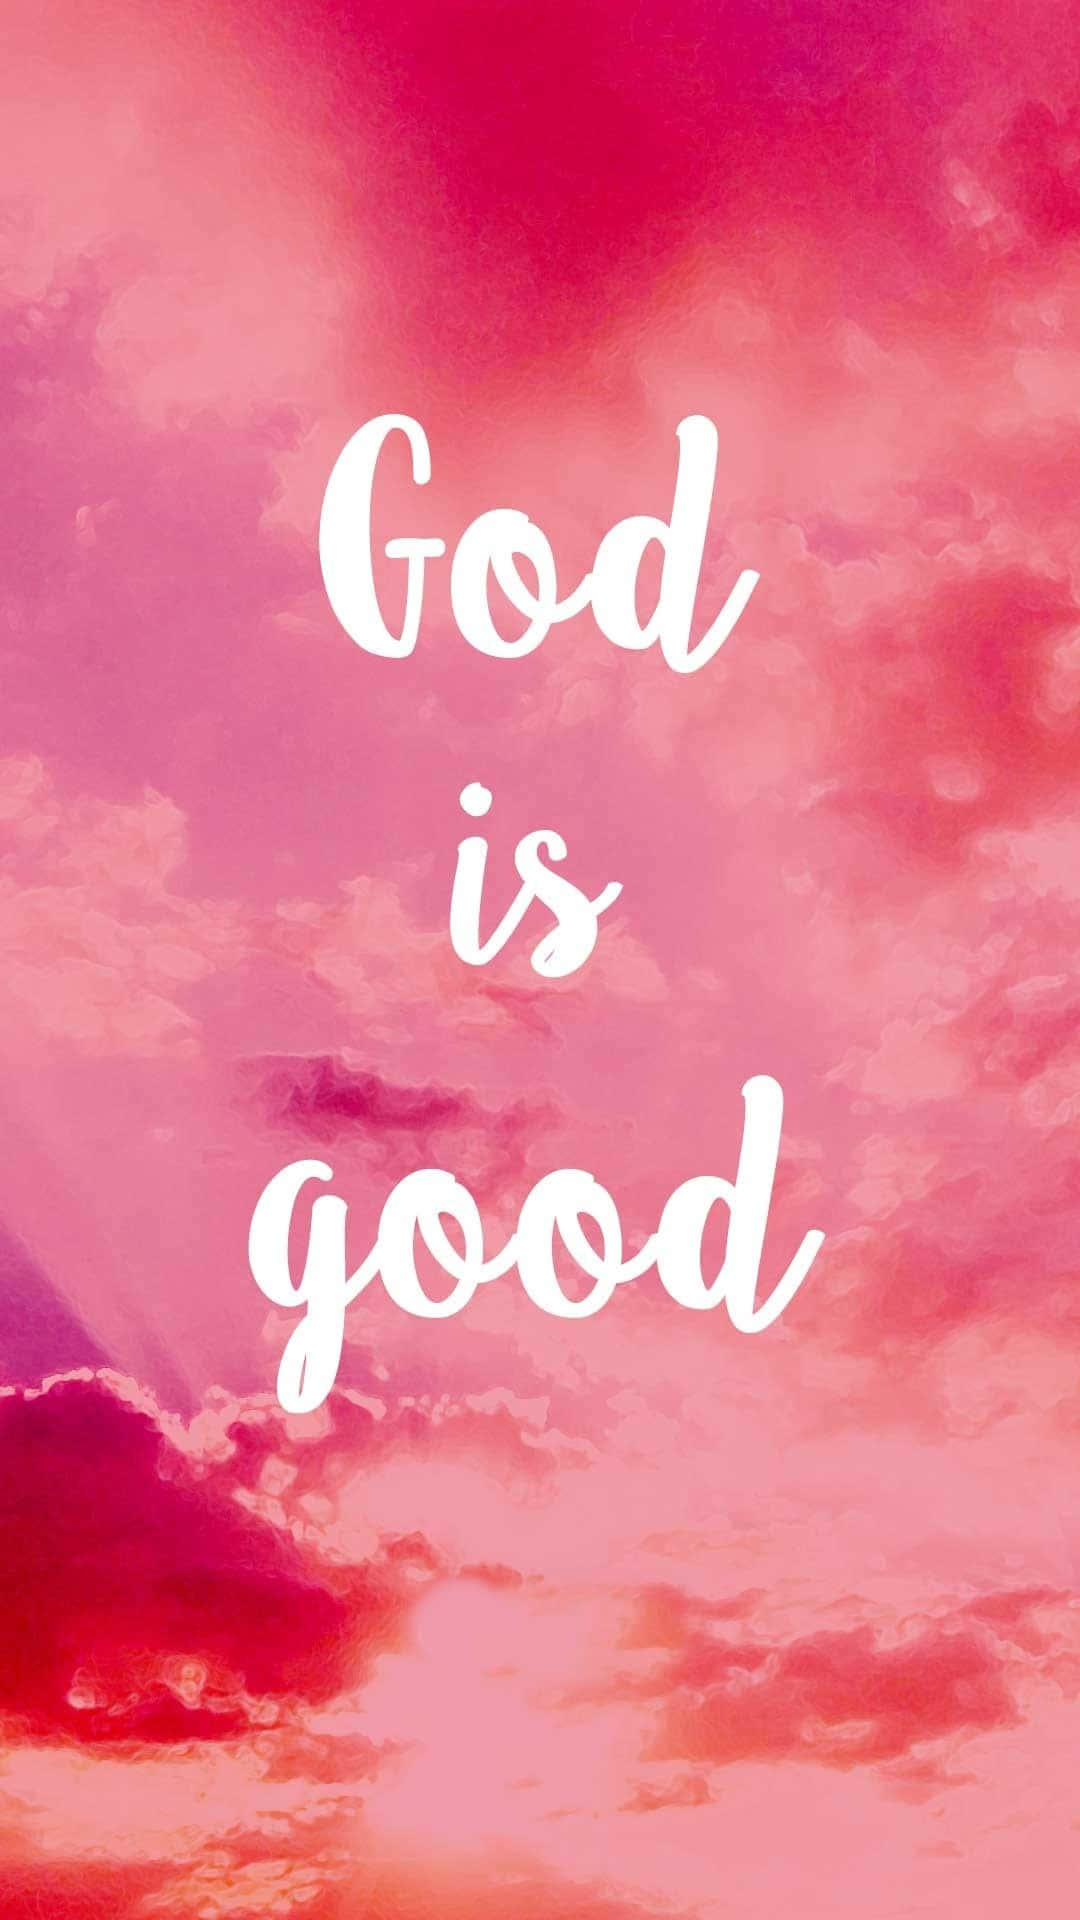 God Is Good Against Pink Clouds Wallpaper